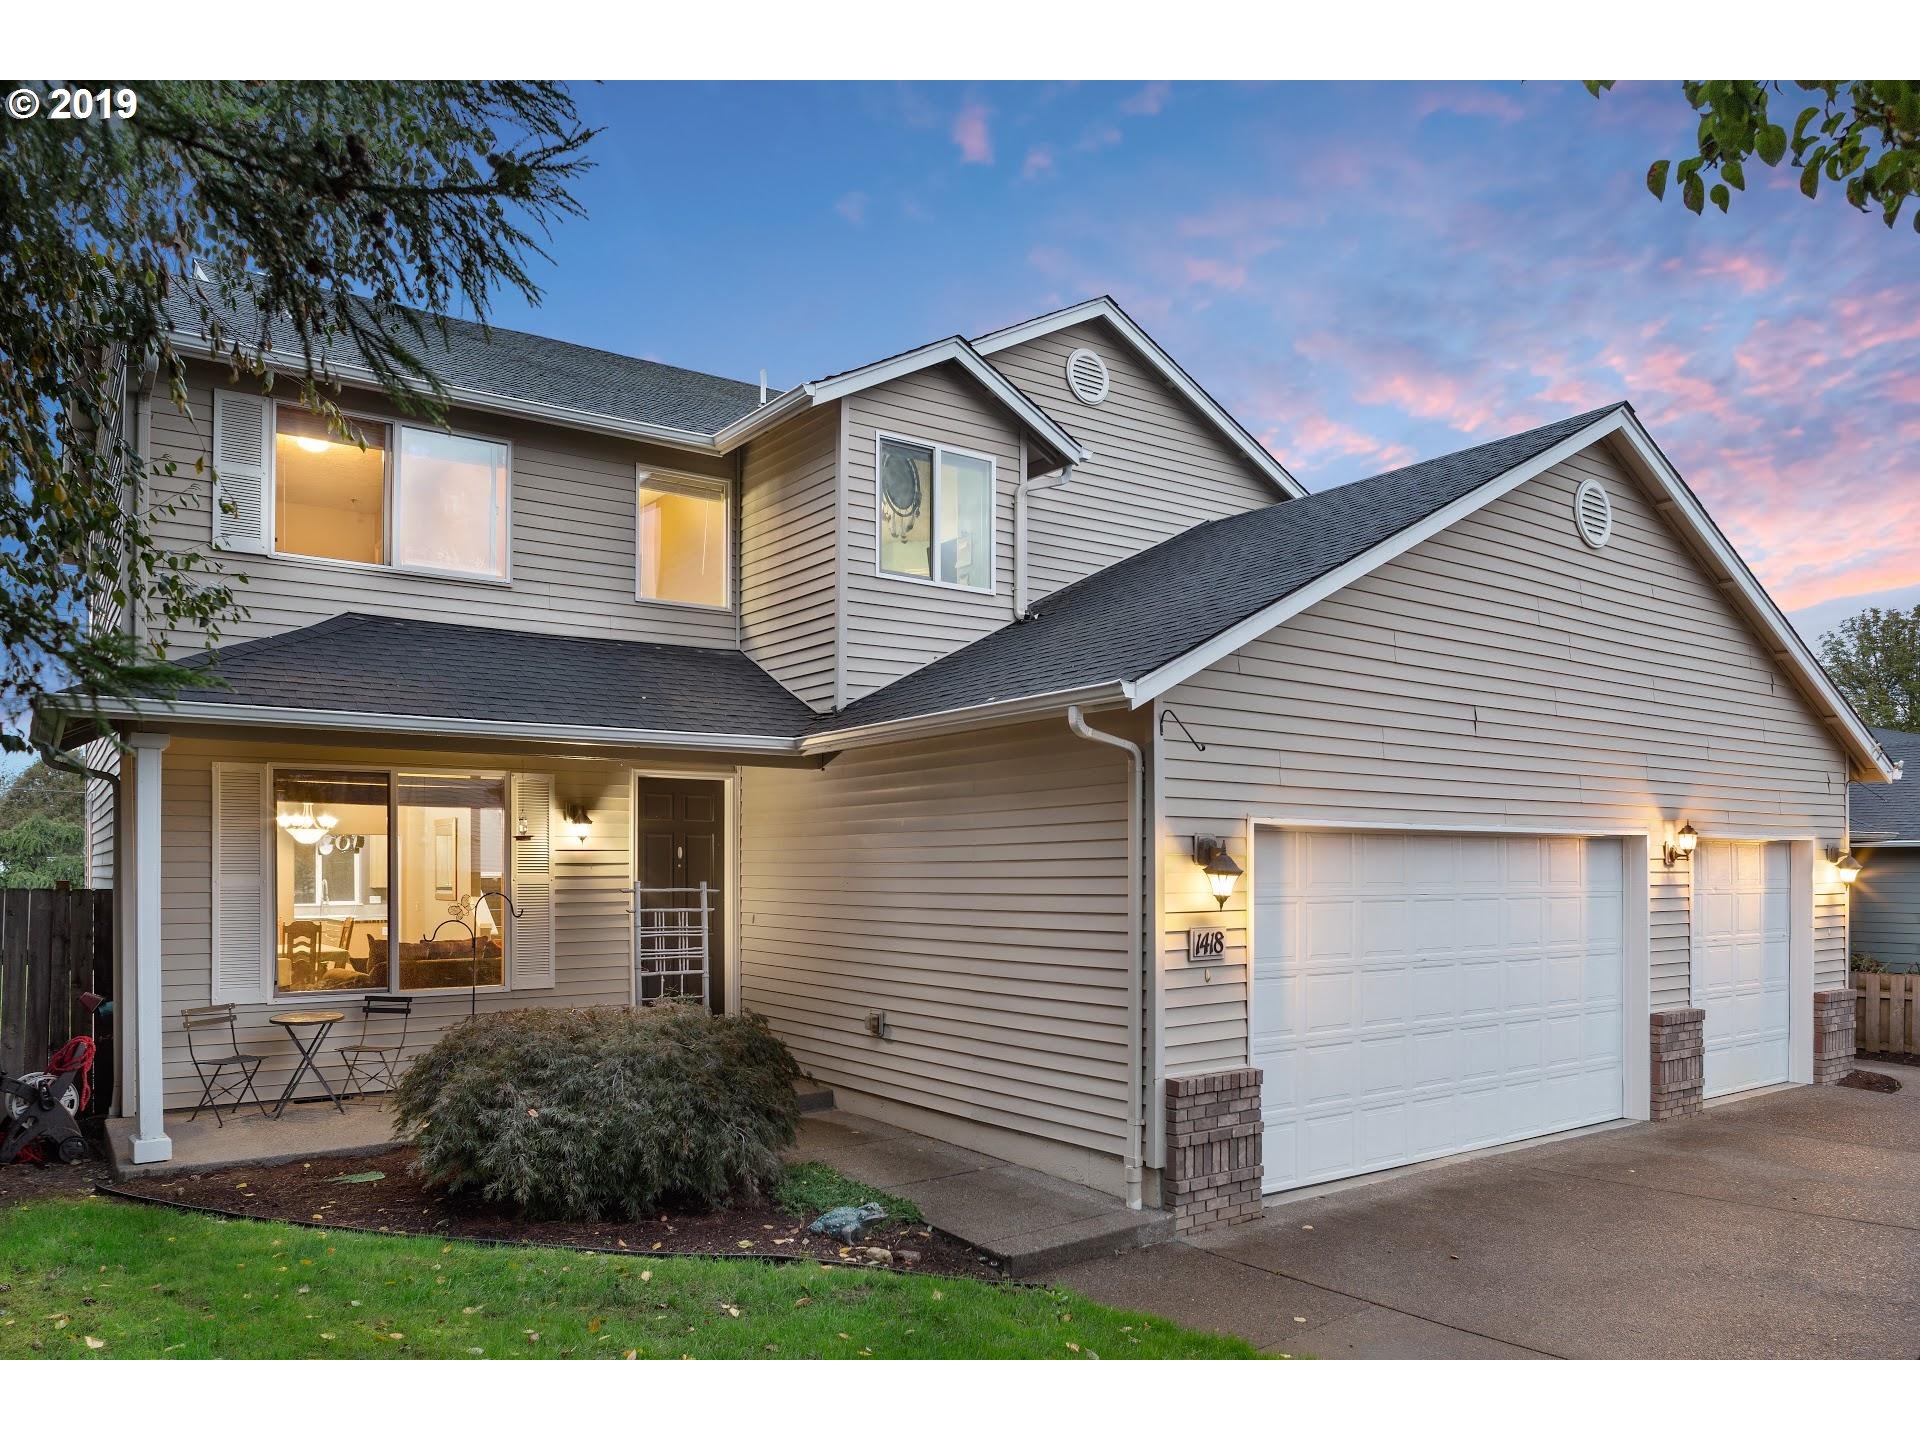 1418 MT VIEW LN (1 of 32)